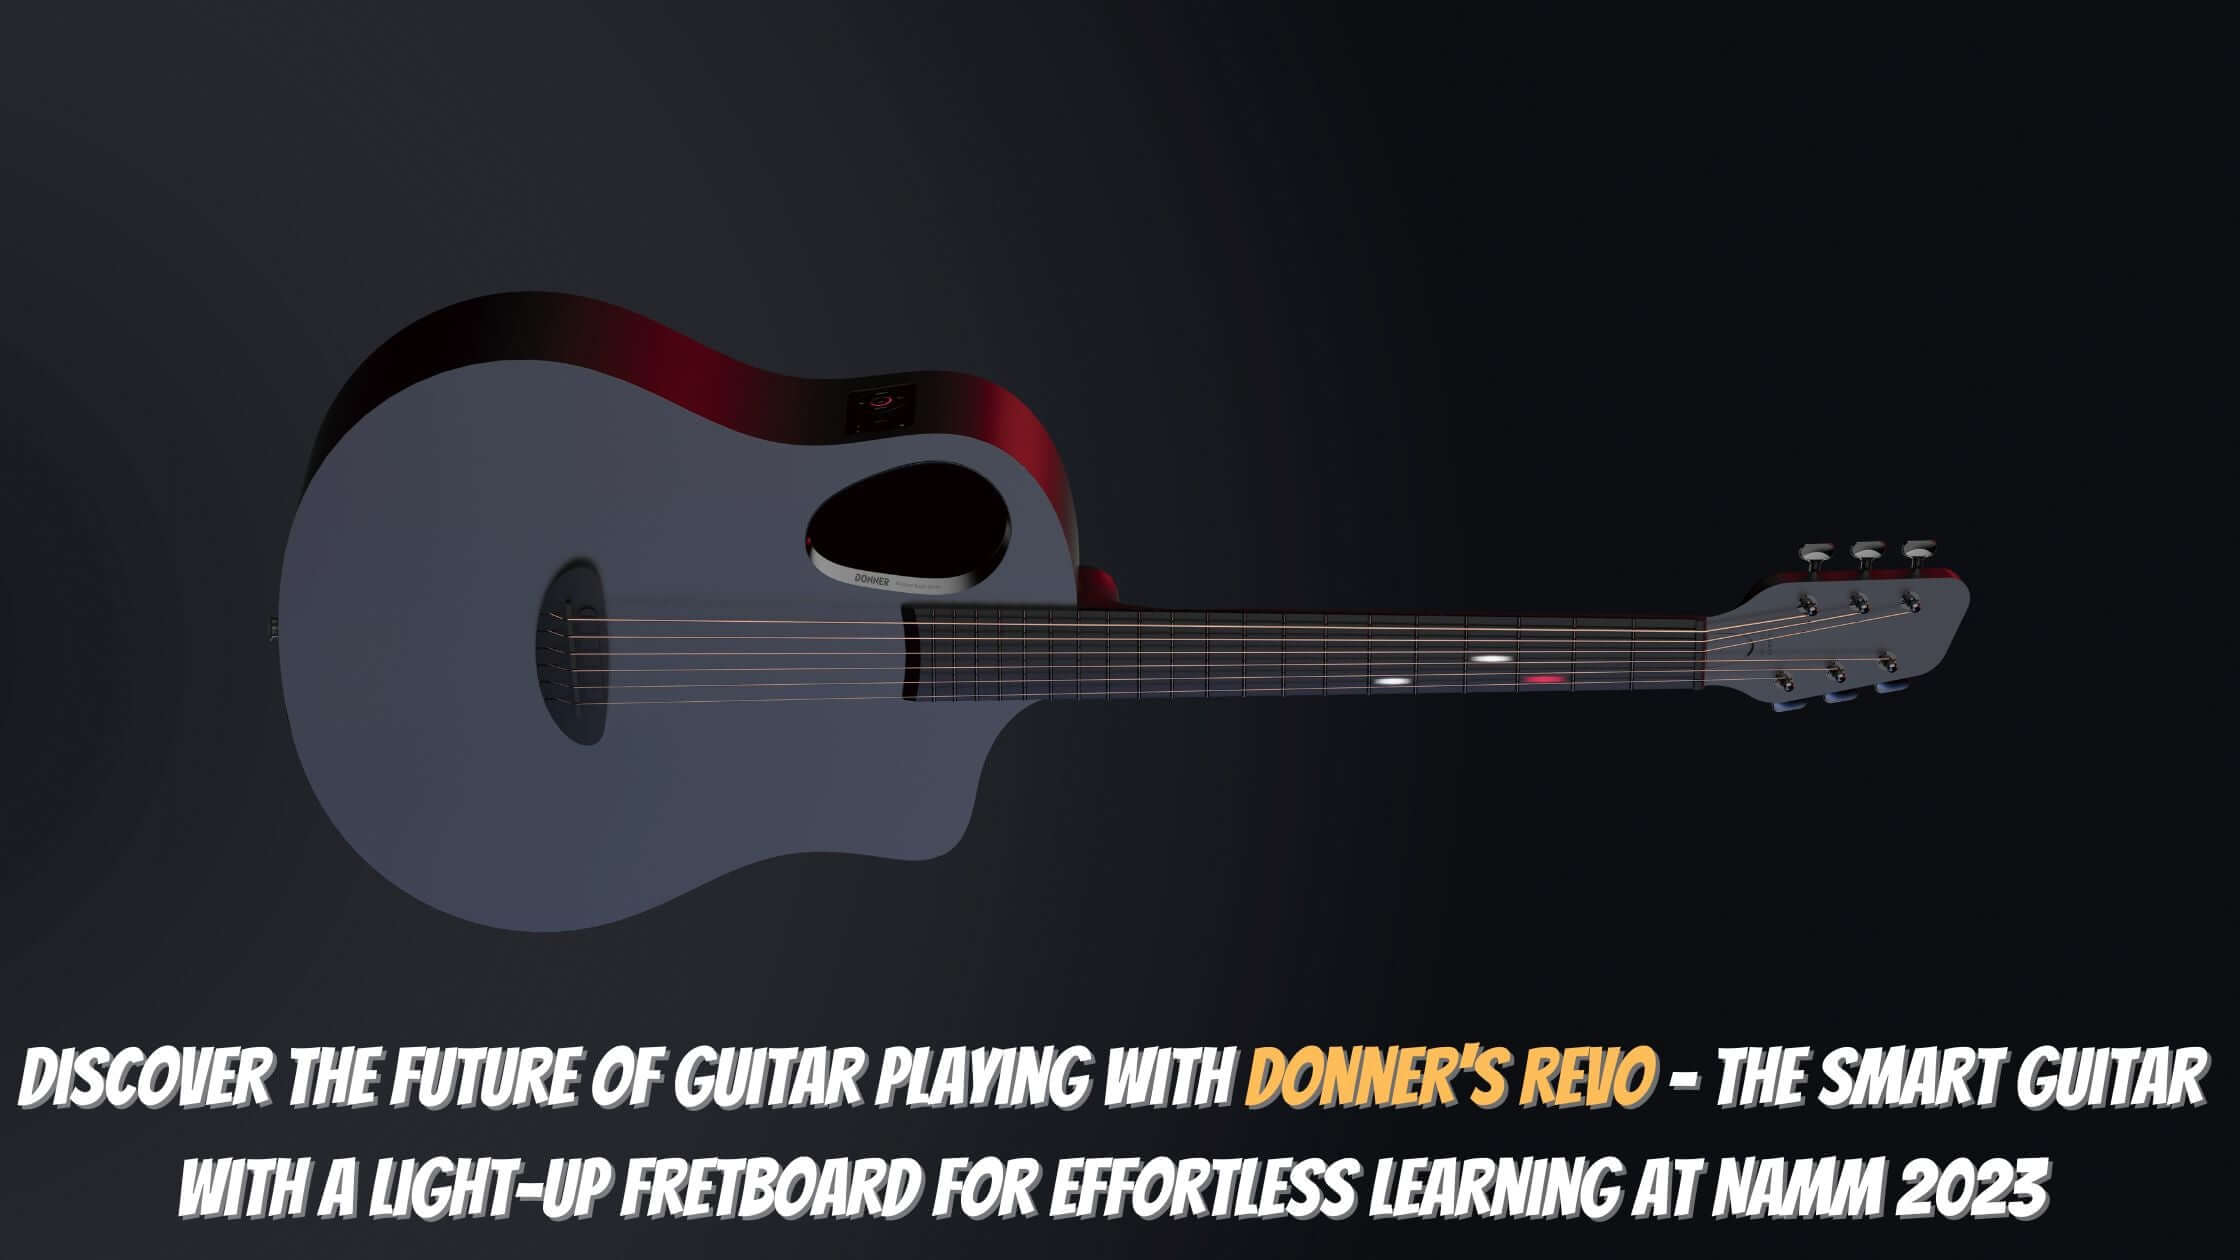 Discover the Future of Guitar Playing with Donner's REVO - The